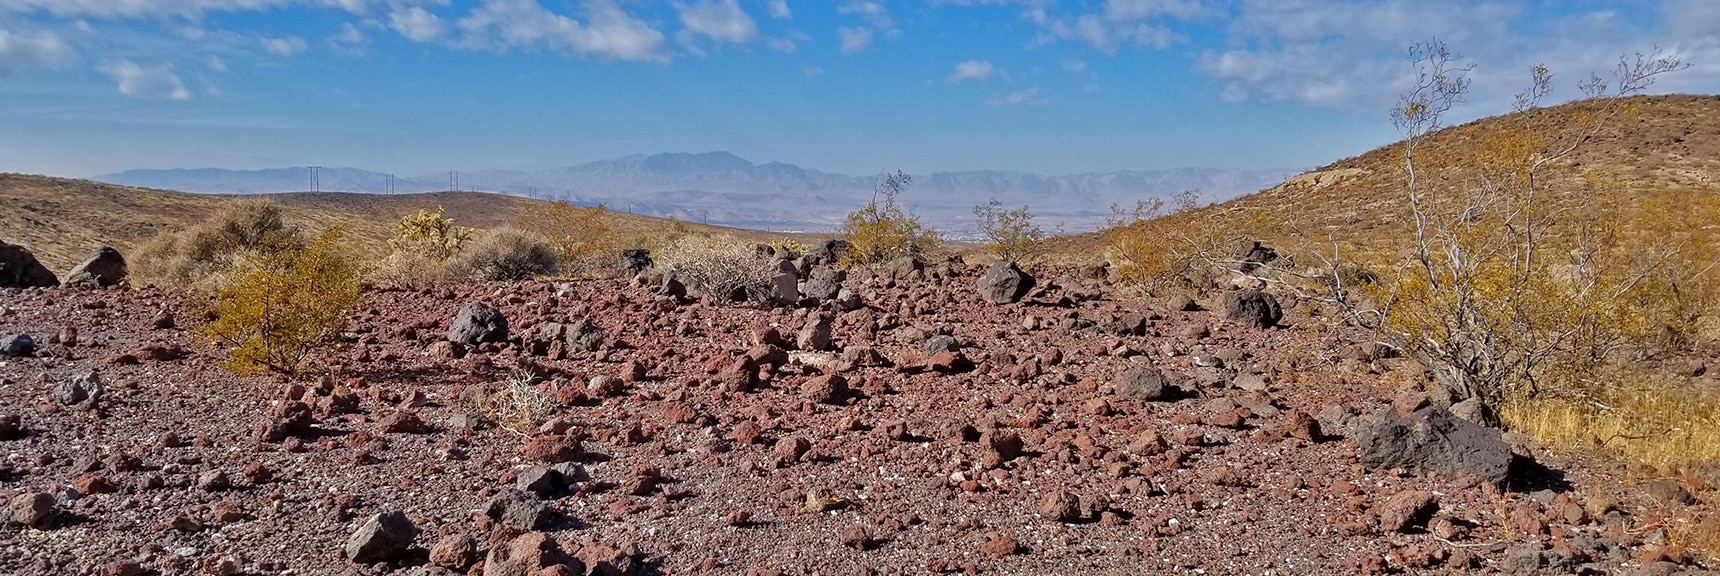 Lots of Volcanic Rock in the Hills. Las Vegas Valley and Rainbow Mountains Backdrop | McCullough Hills Trail in Sloan Canyon National Conservation Area, Nevada